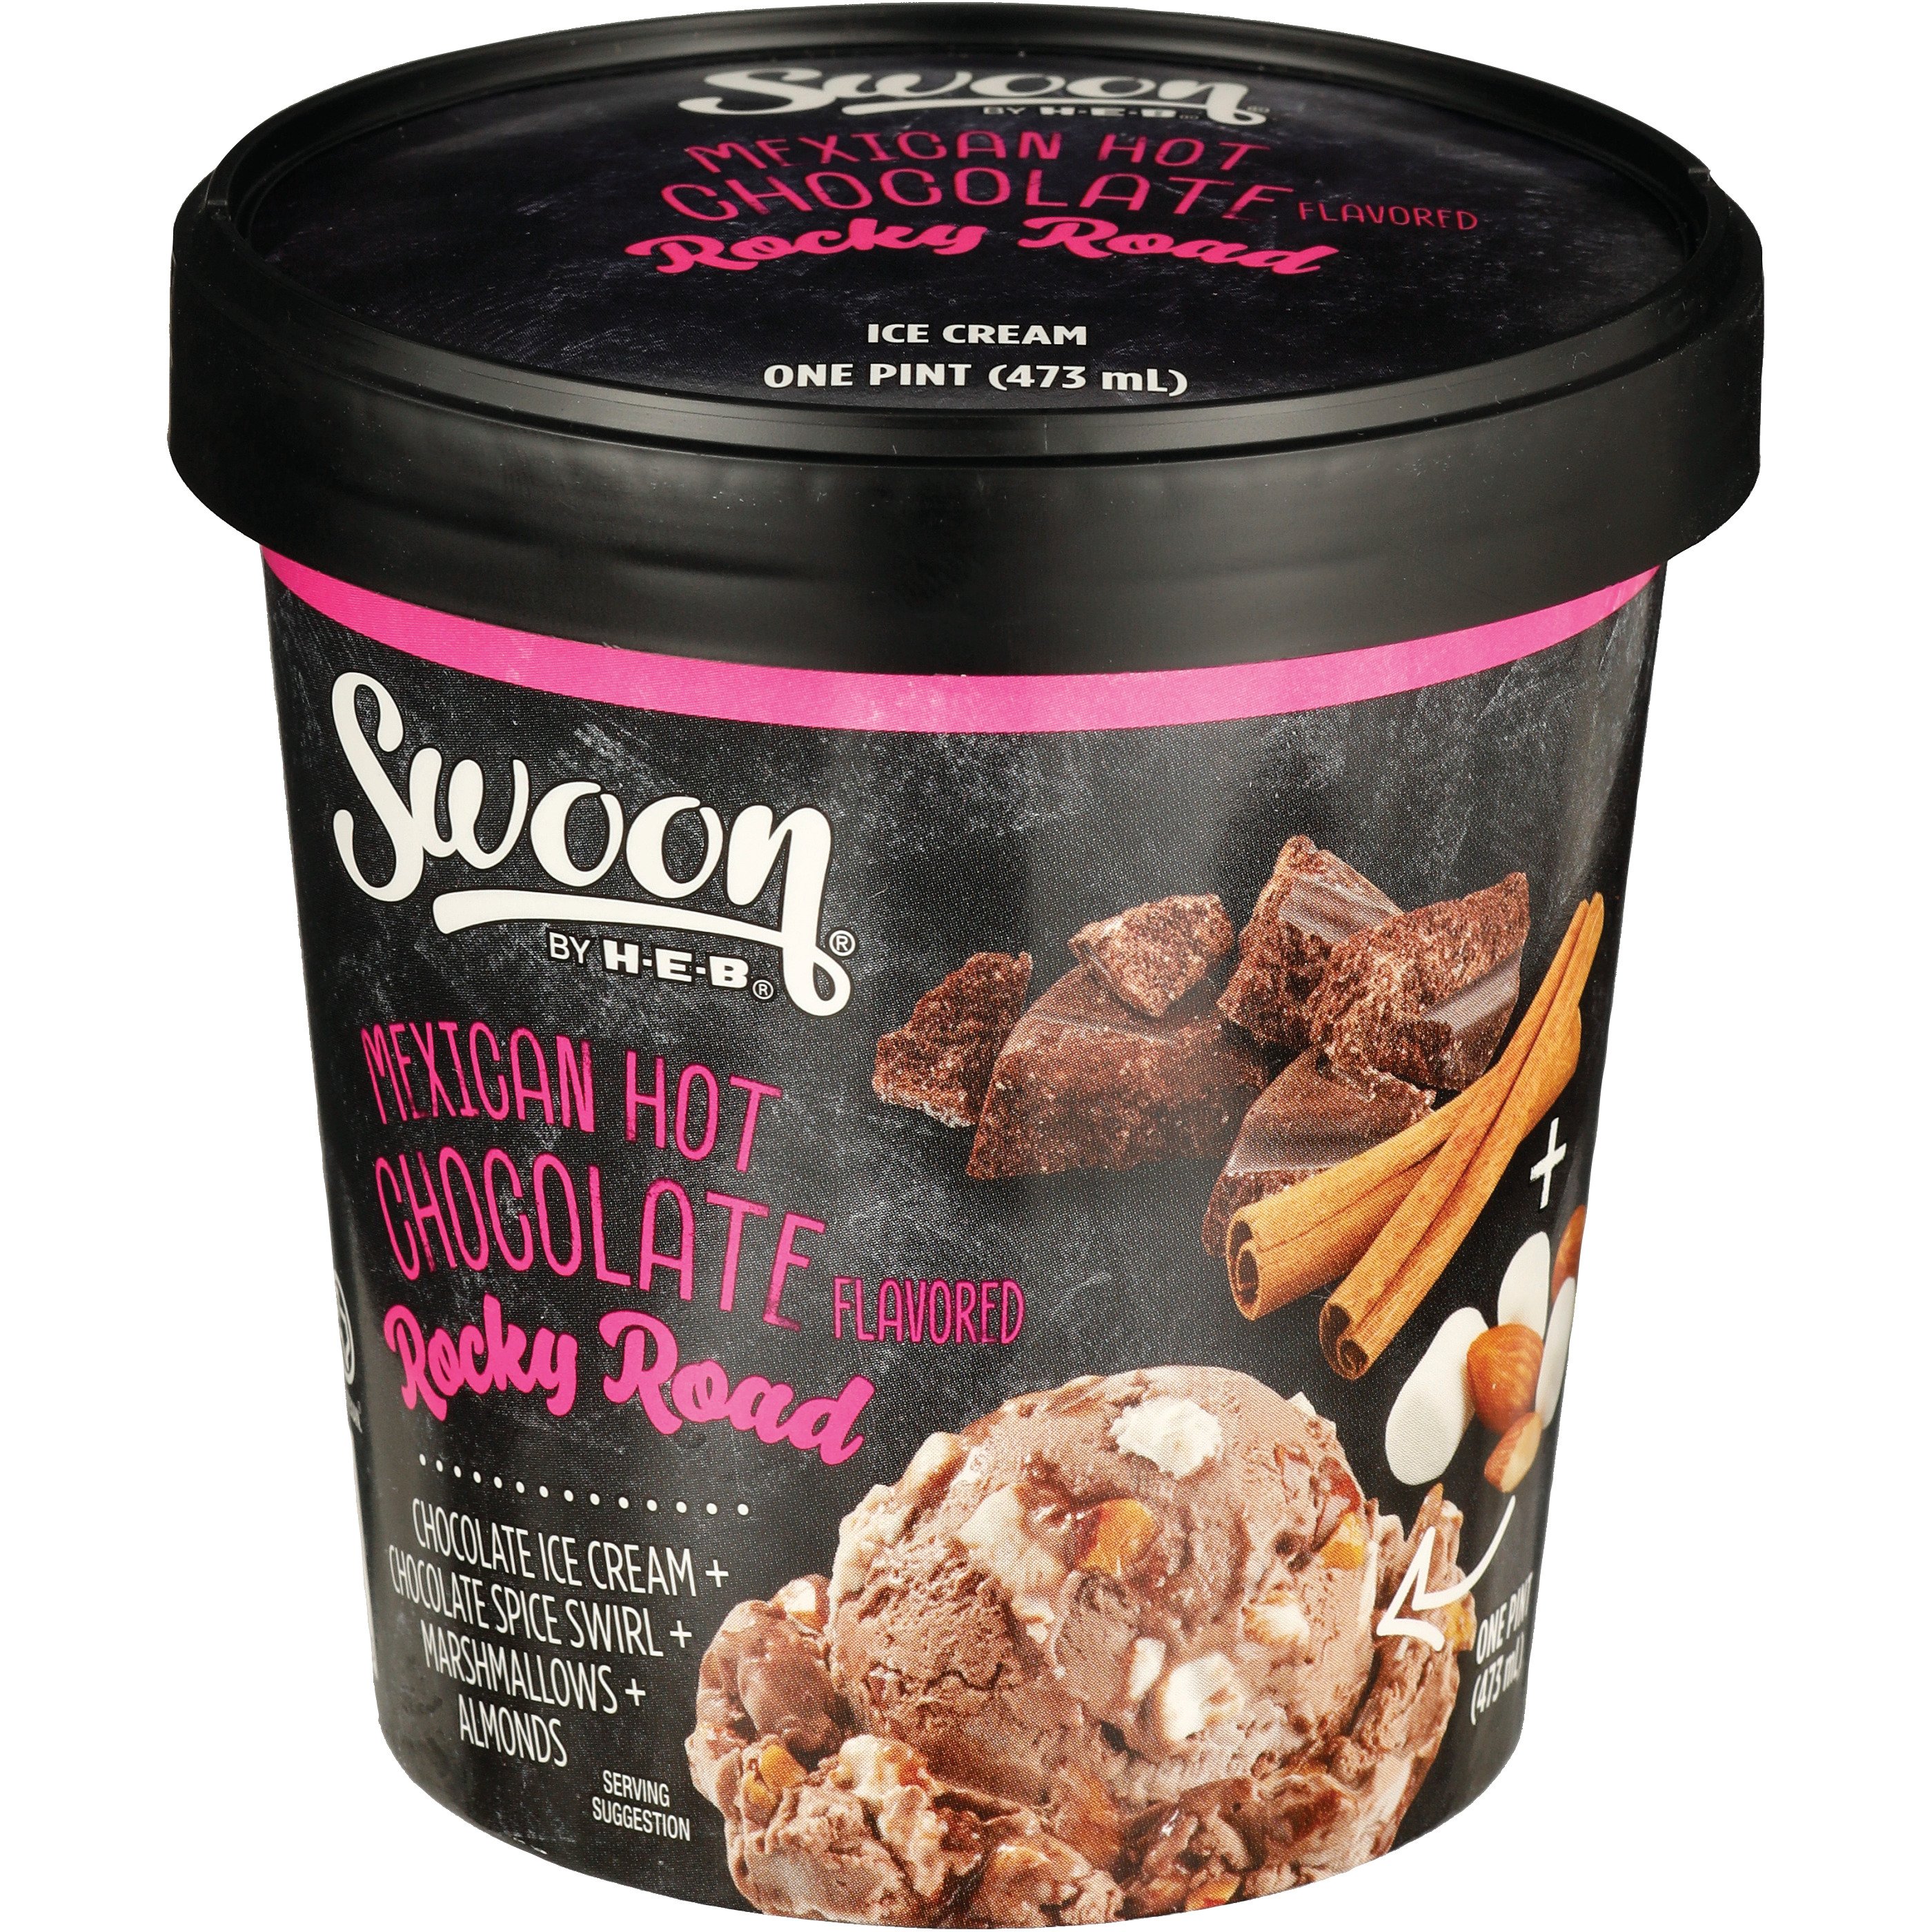 Swoon by H-E-B Mexican Hot Chocolate Rocky Road Ice Cream - Shop Ice ...